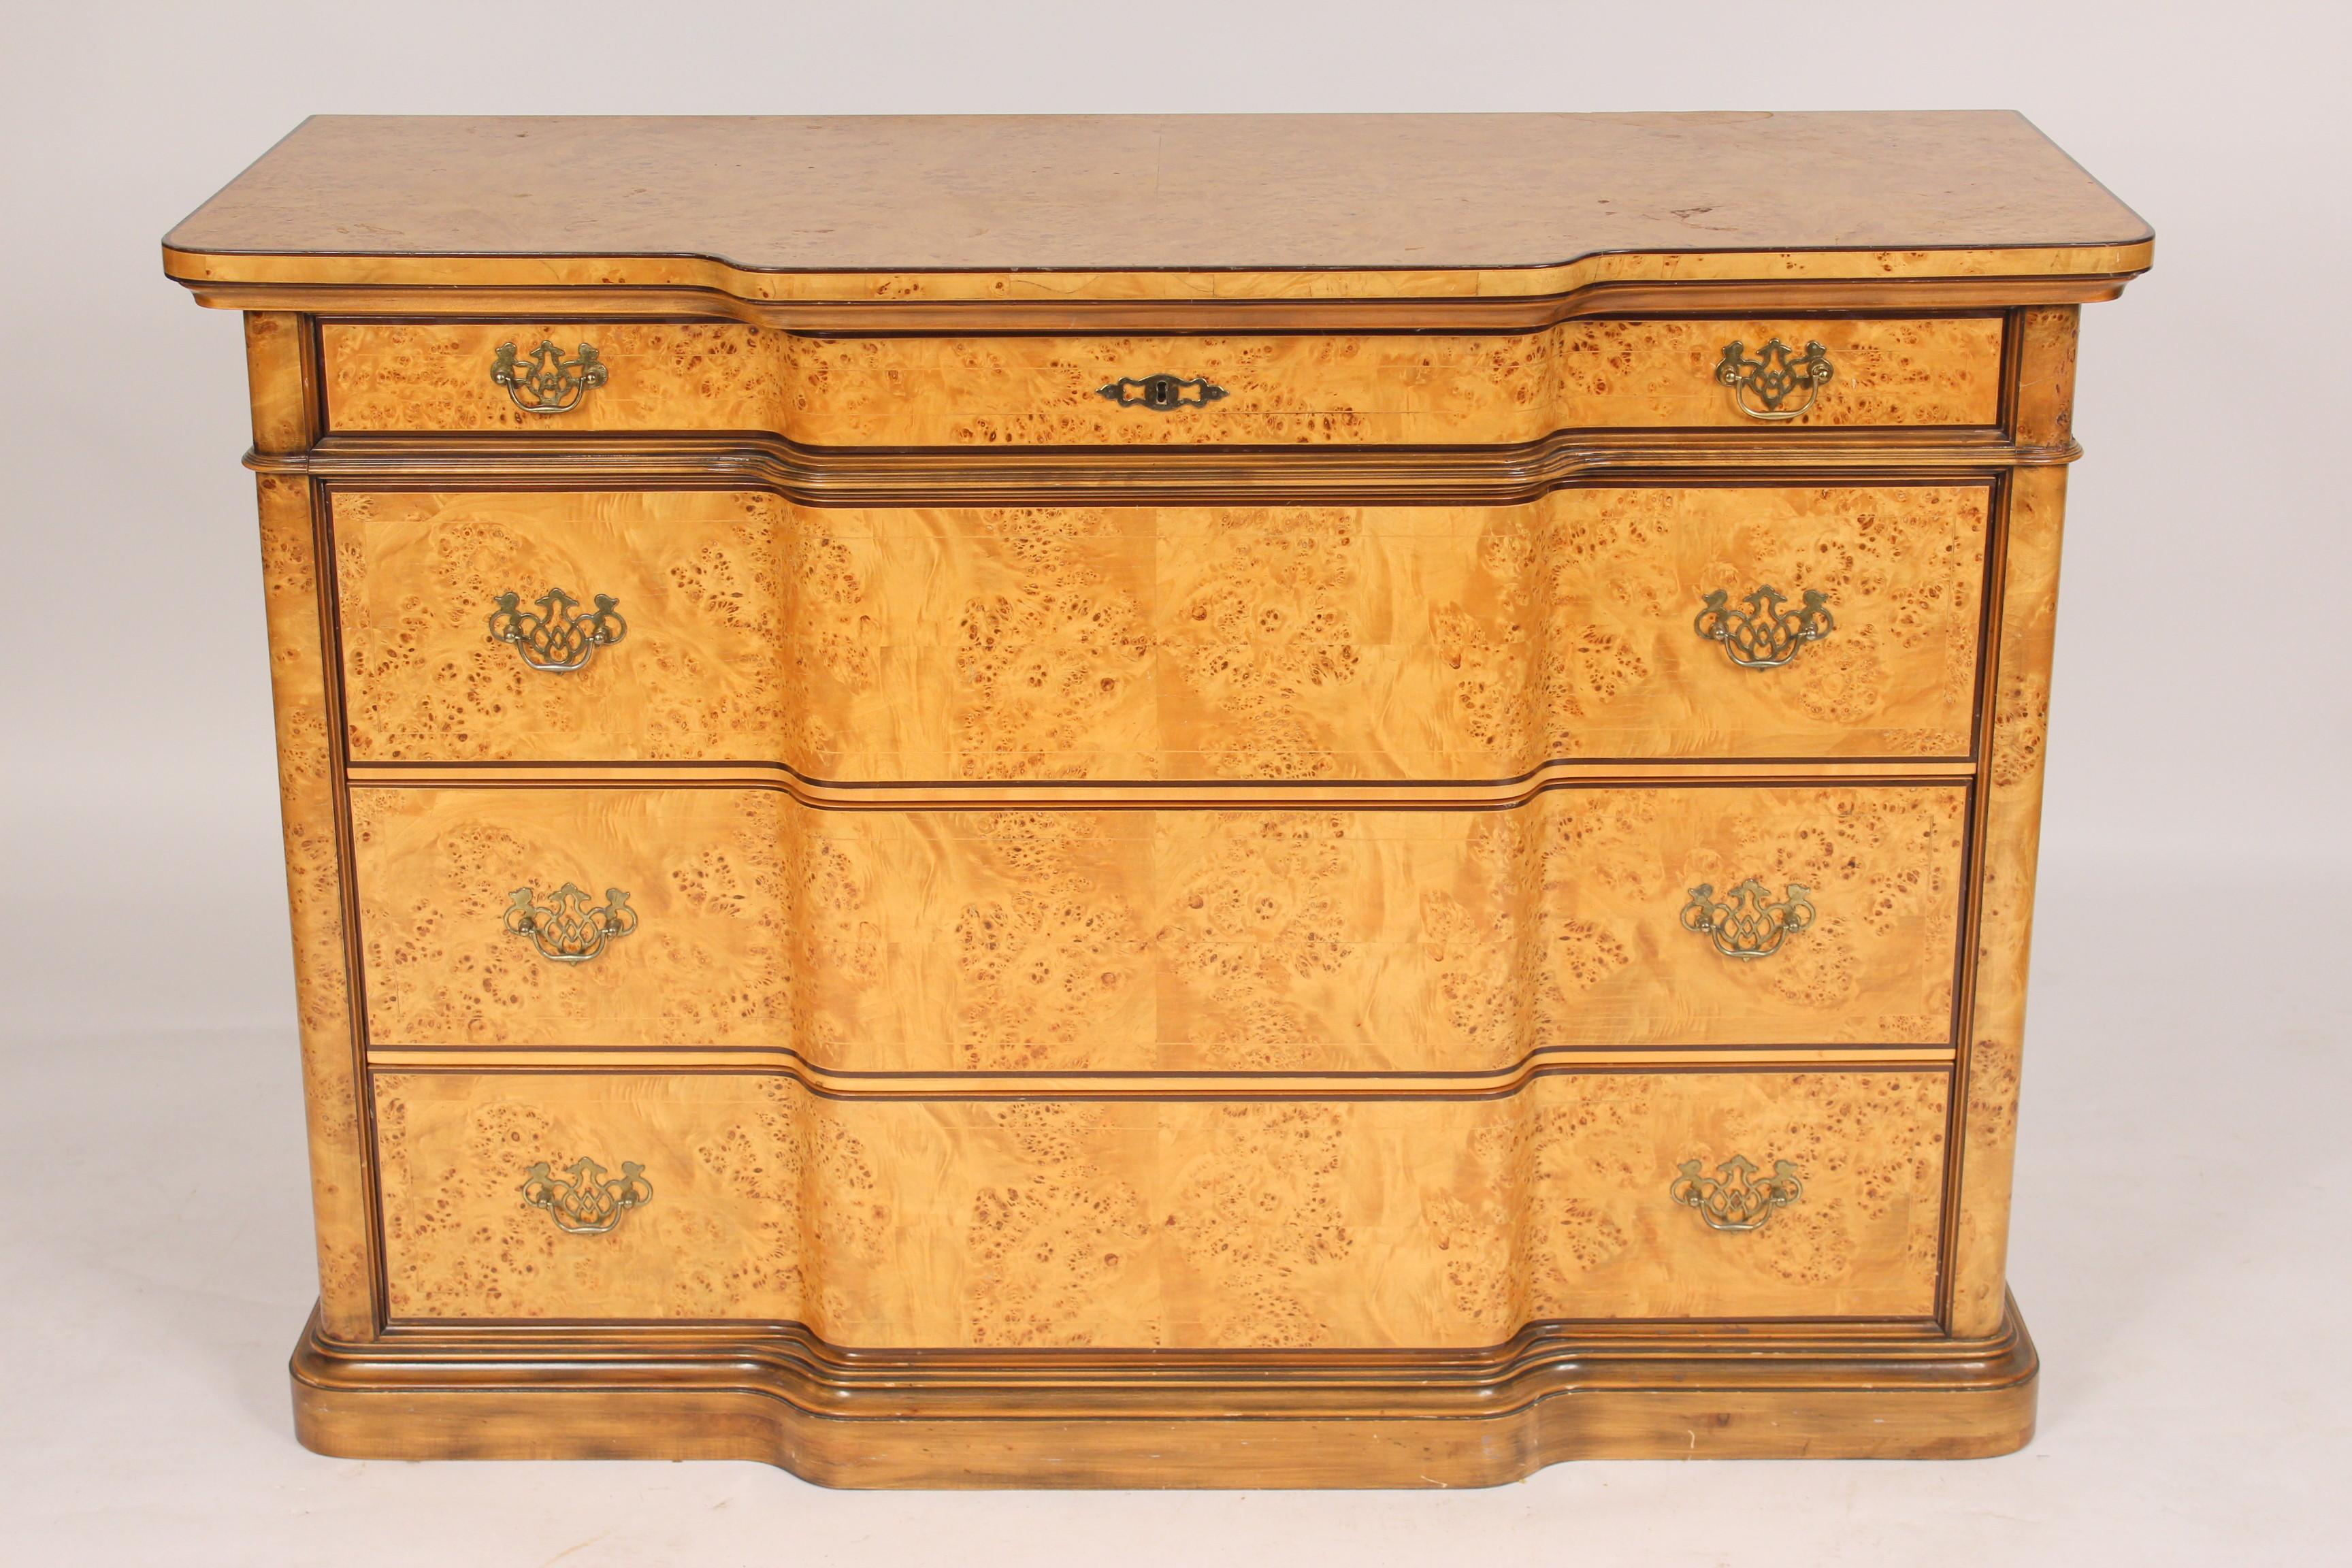 George III style burled birch chest of drawers / server, made in Italy, late 20th century. The burled birch on this chest of drawers is exceptional.